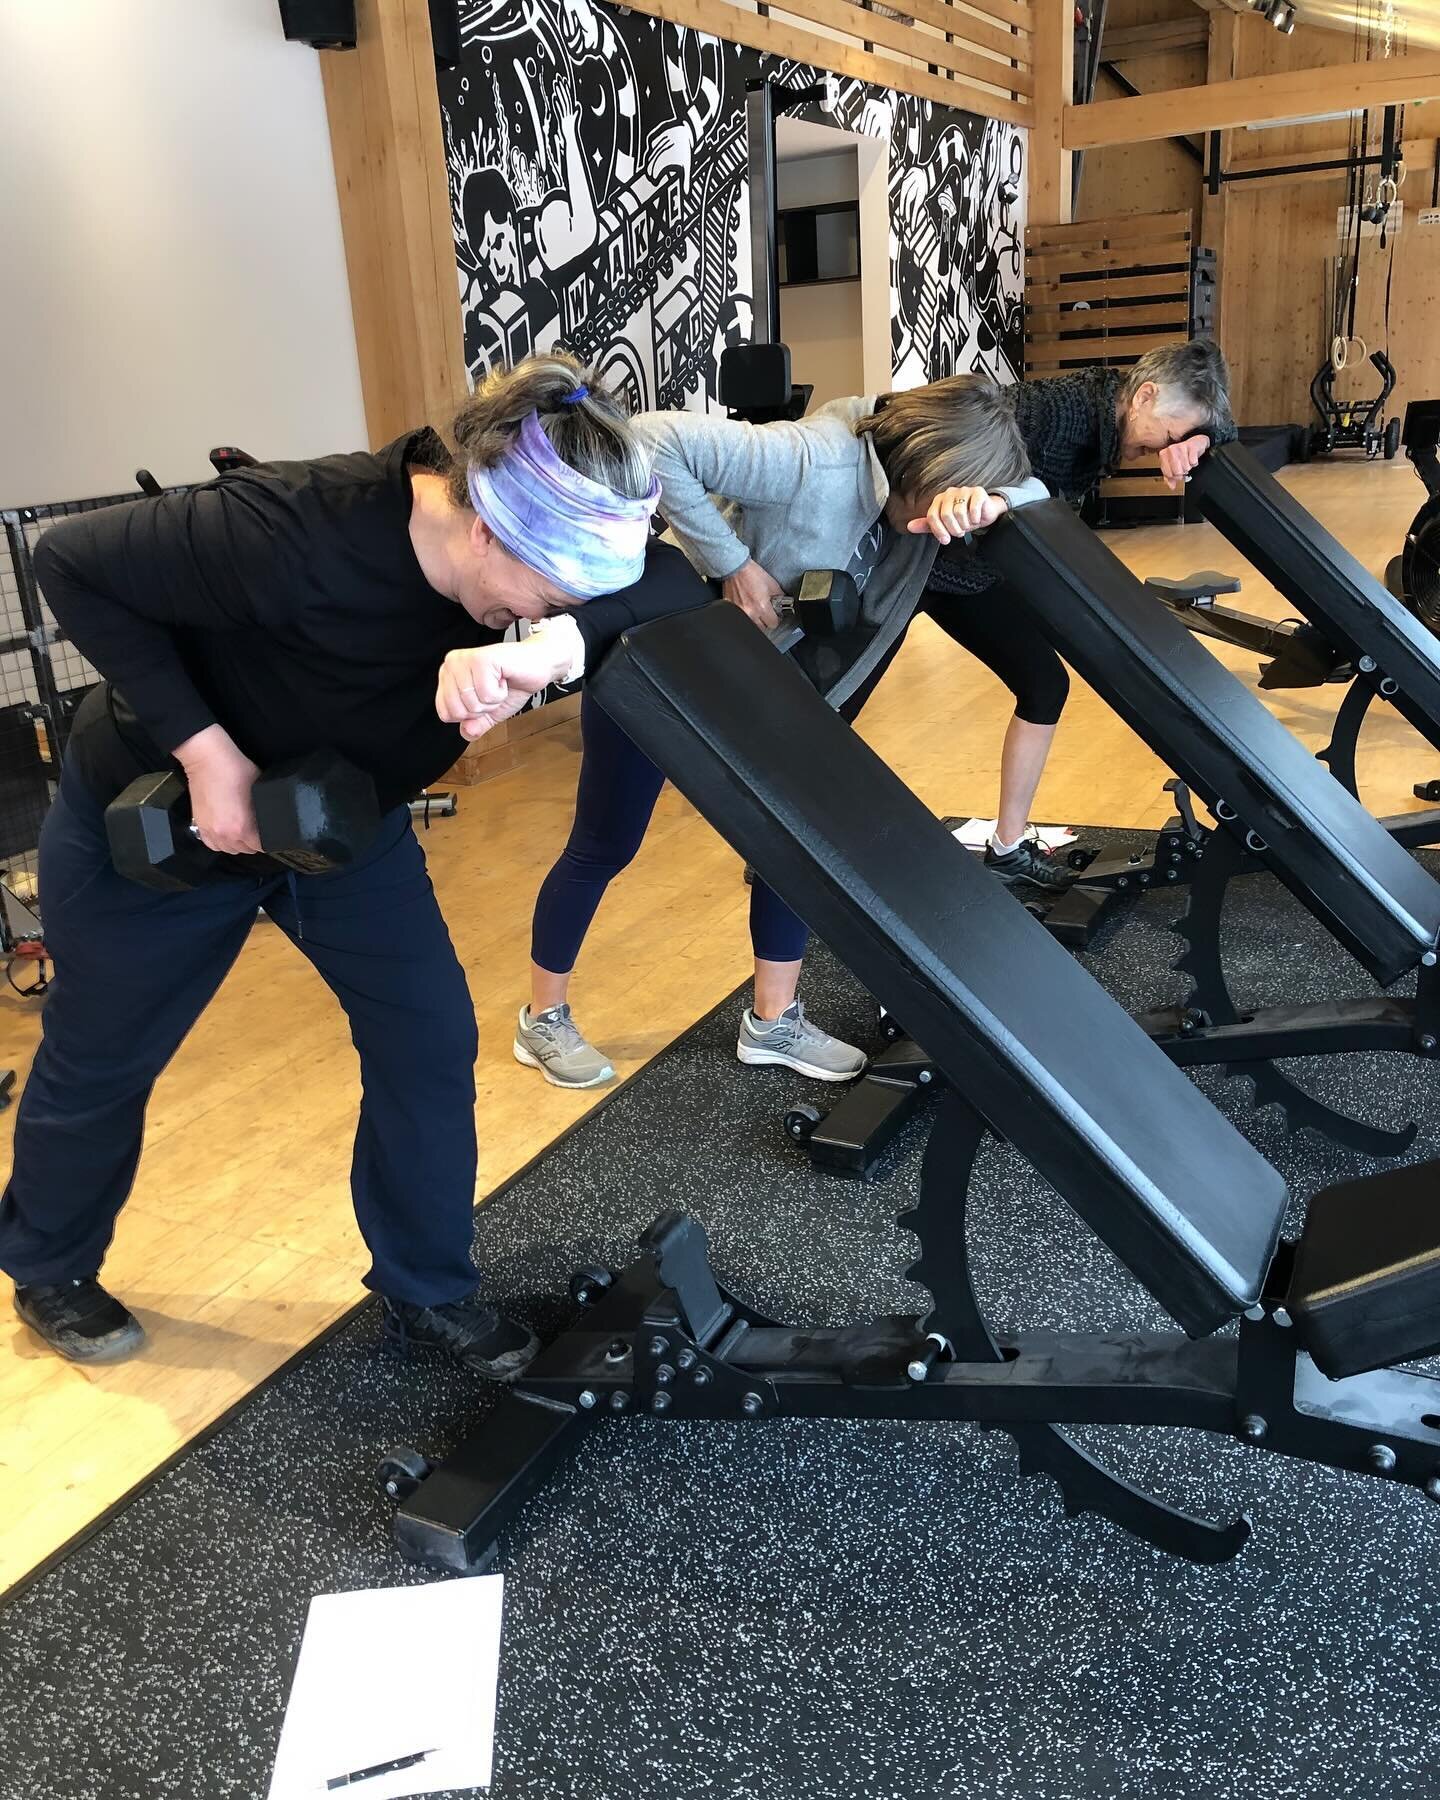 Strong women @klimatwakefield learning to lift with good form. Next women&rsquo;s Lifting Class in March! @elle_odyn #womenliftingweights #learntolift #learntoliftweights #liftforlife #womensstrength #womensstrengthtraining #womensstrengthcoach #wome